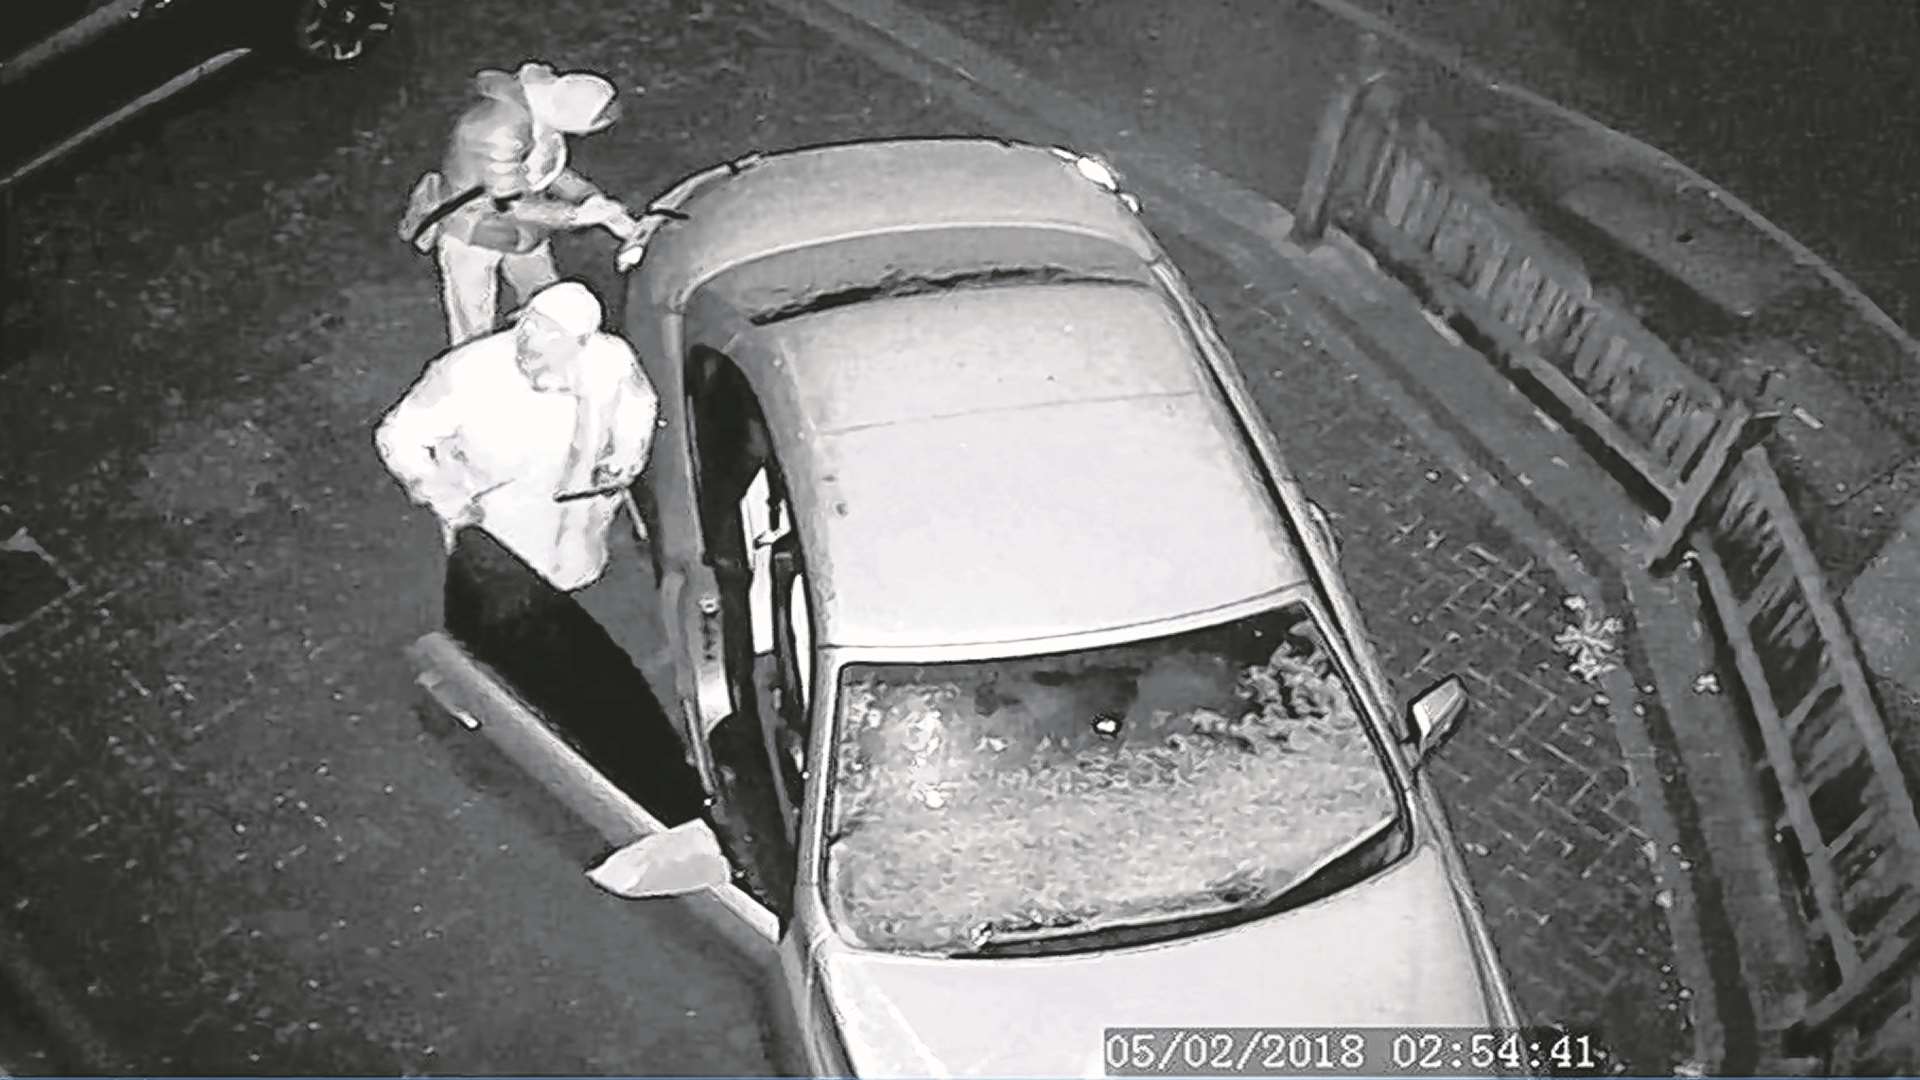 One thief then drilled into the driver's door to unlock the car.